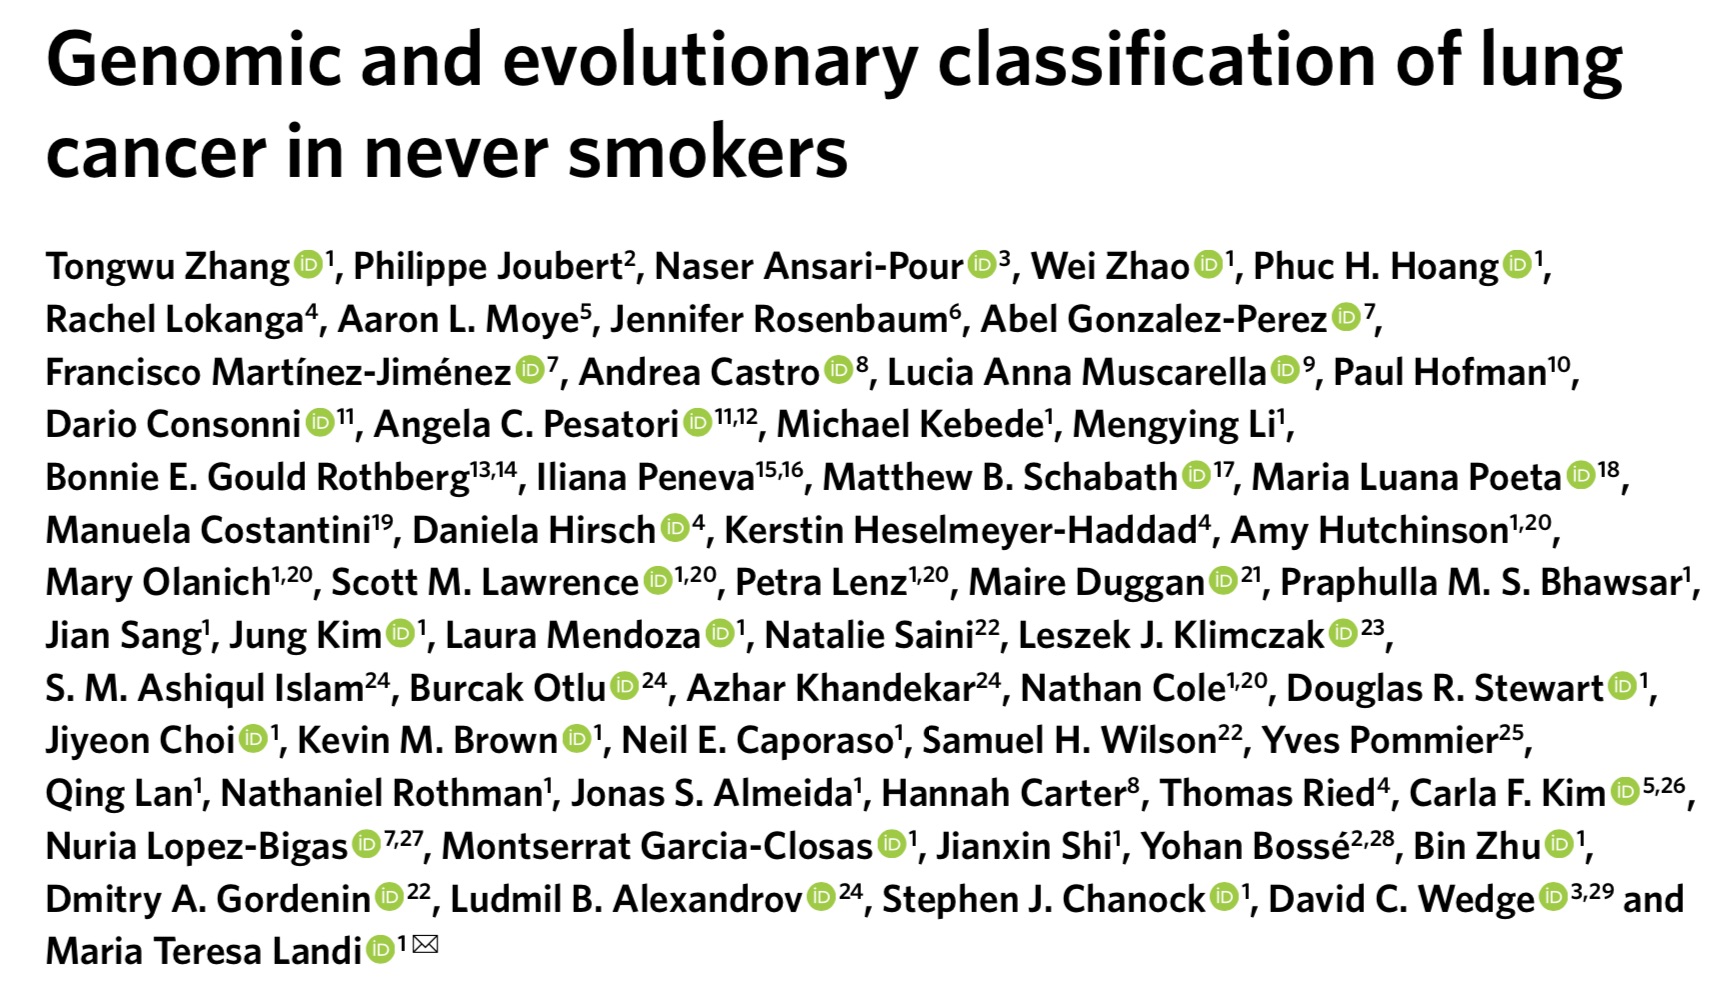 Genomic and evolutionary classification of lung cancer in never smokers